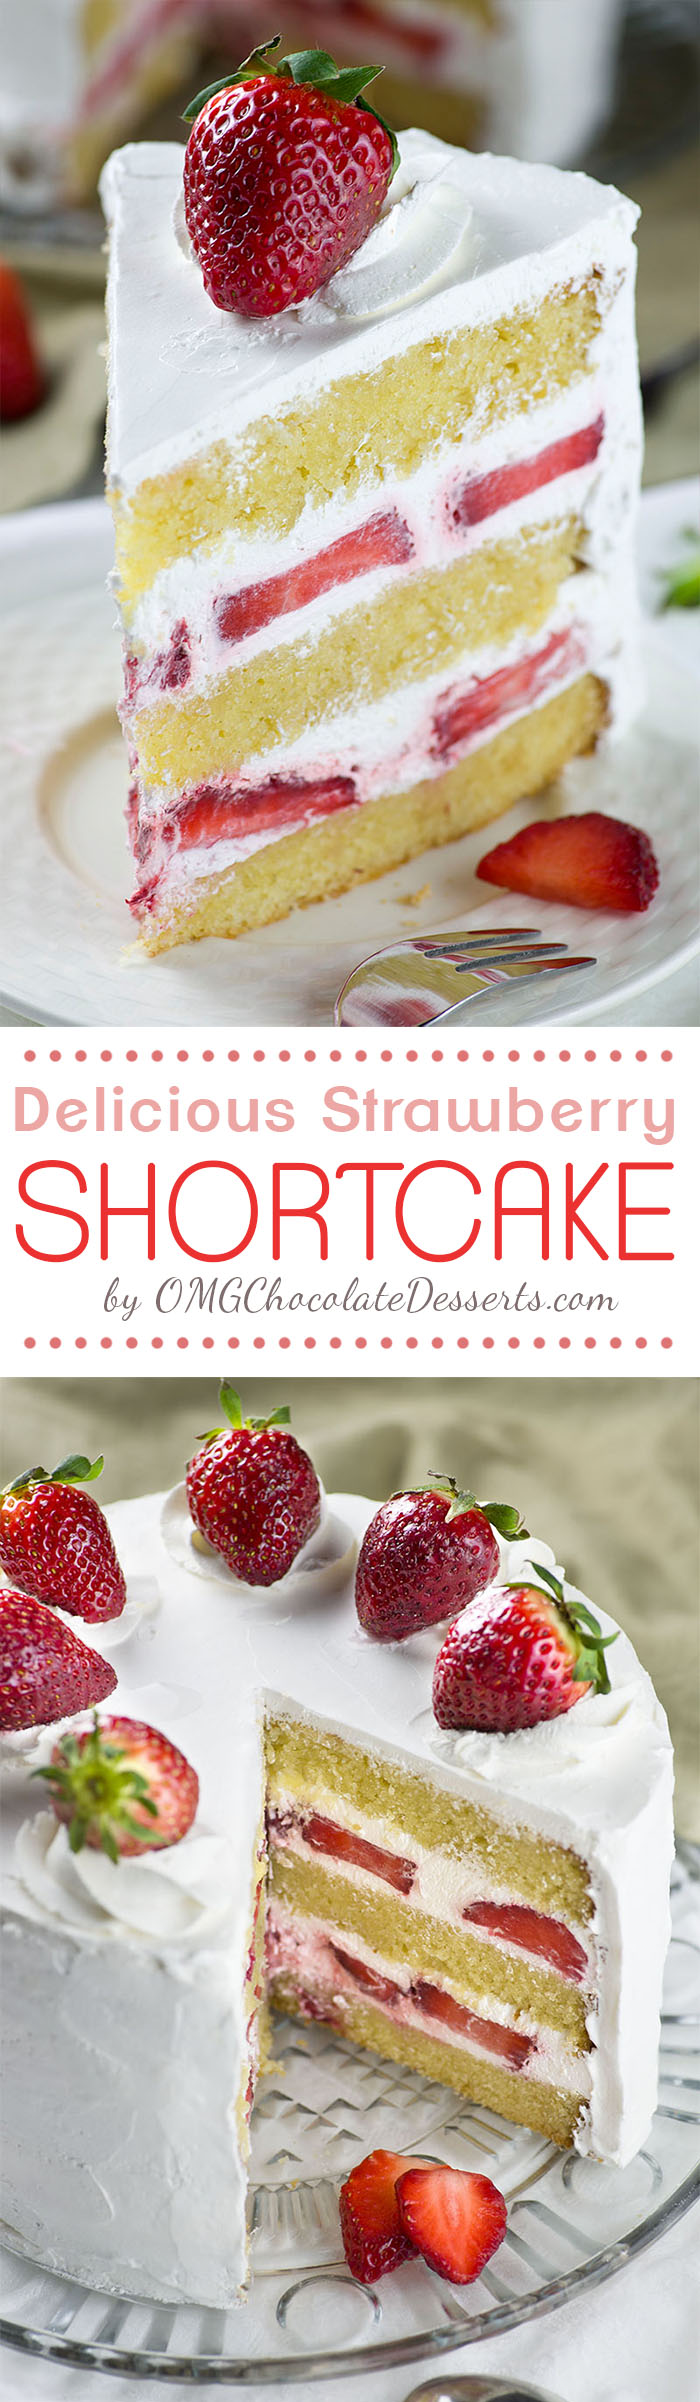 We've found 15 of the Best Unique Strawberry Shortcake Recipes that will help you take this classic dessert to the next level for your family and friends. These interesting versions of Strawberry Shortcake are such great Summer desserts ideas. Pin these yummy treats for later and follow us for more great food ideas.